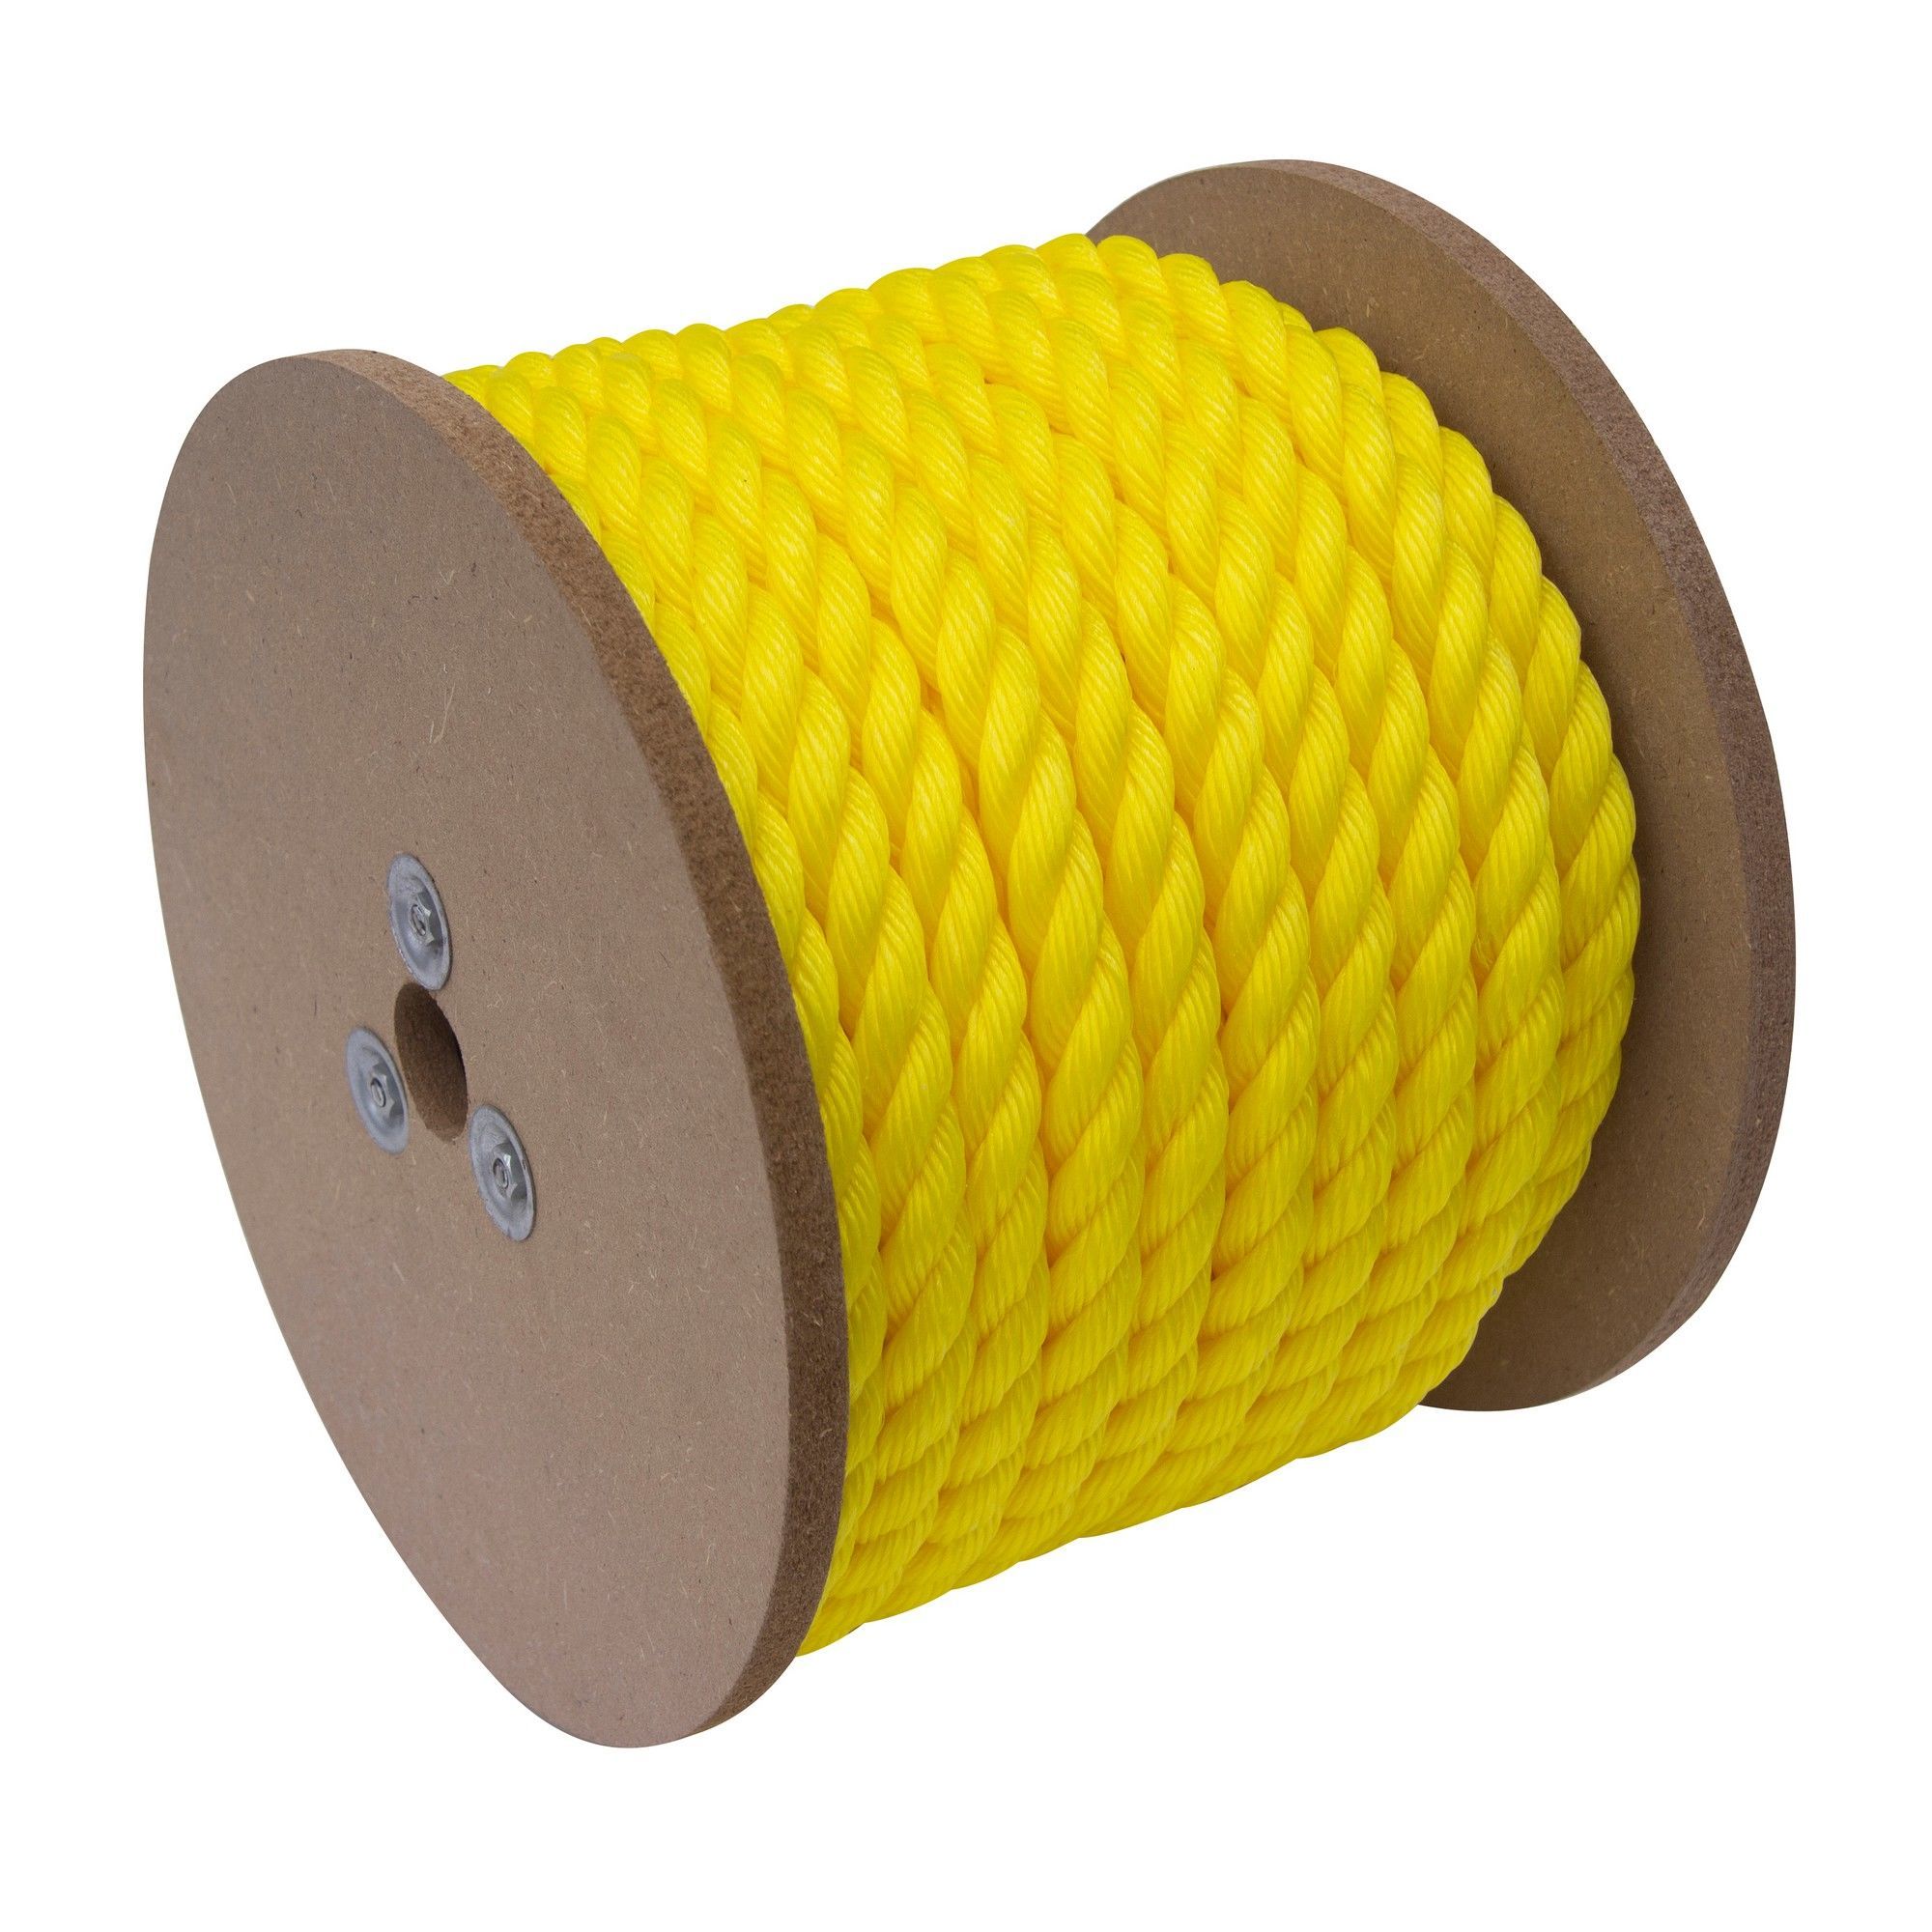 Twisted Polypropylene Rope - Yellow - 3/4 x 100' from KINGCORD